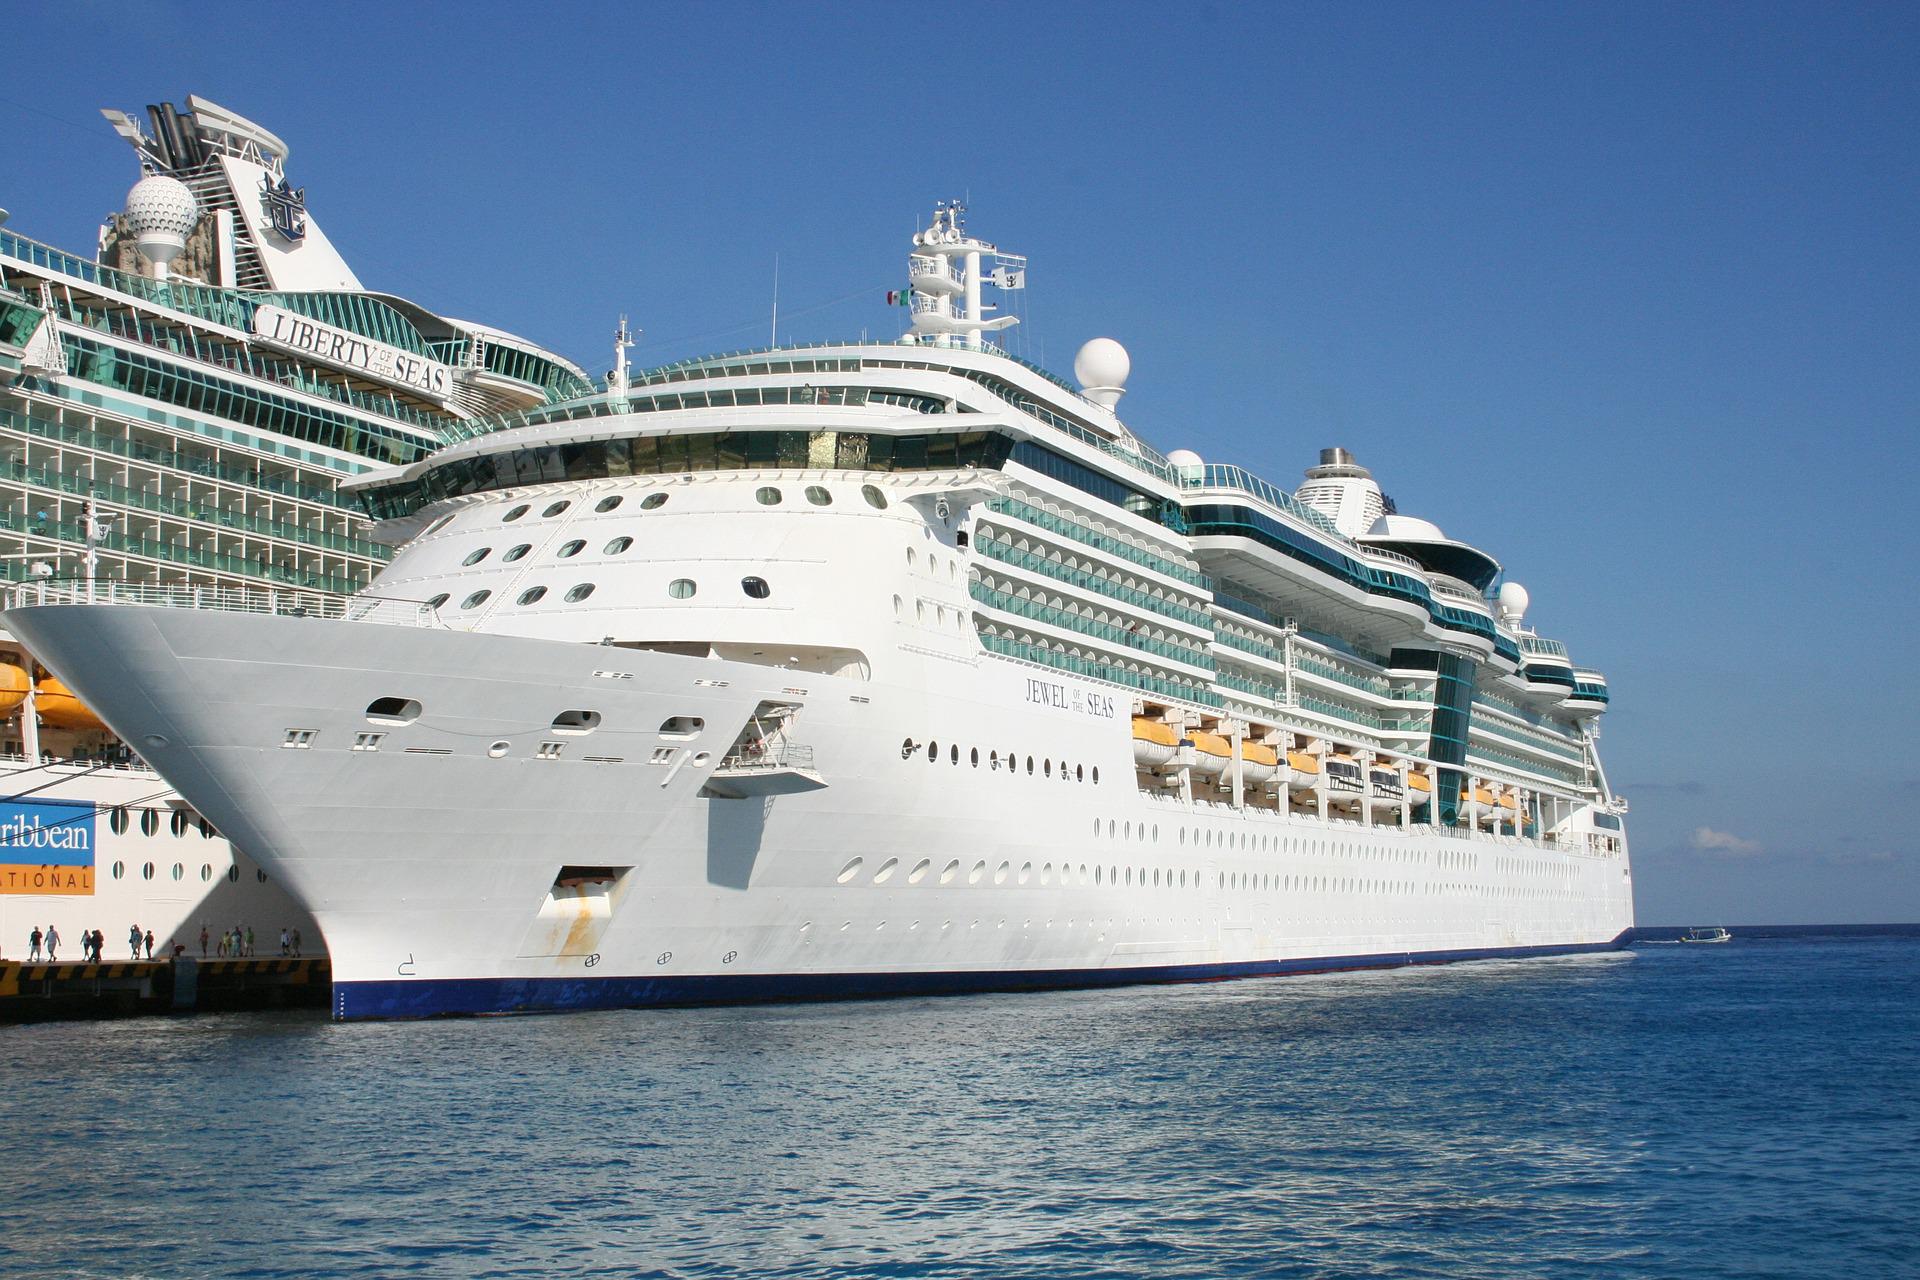 All Royal Caribbean ships are back in service